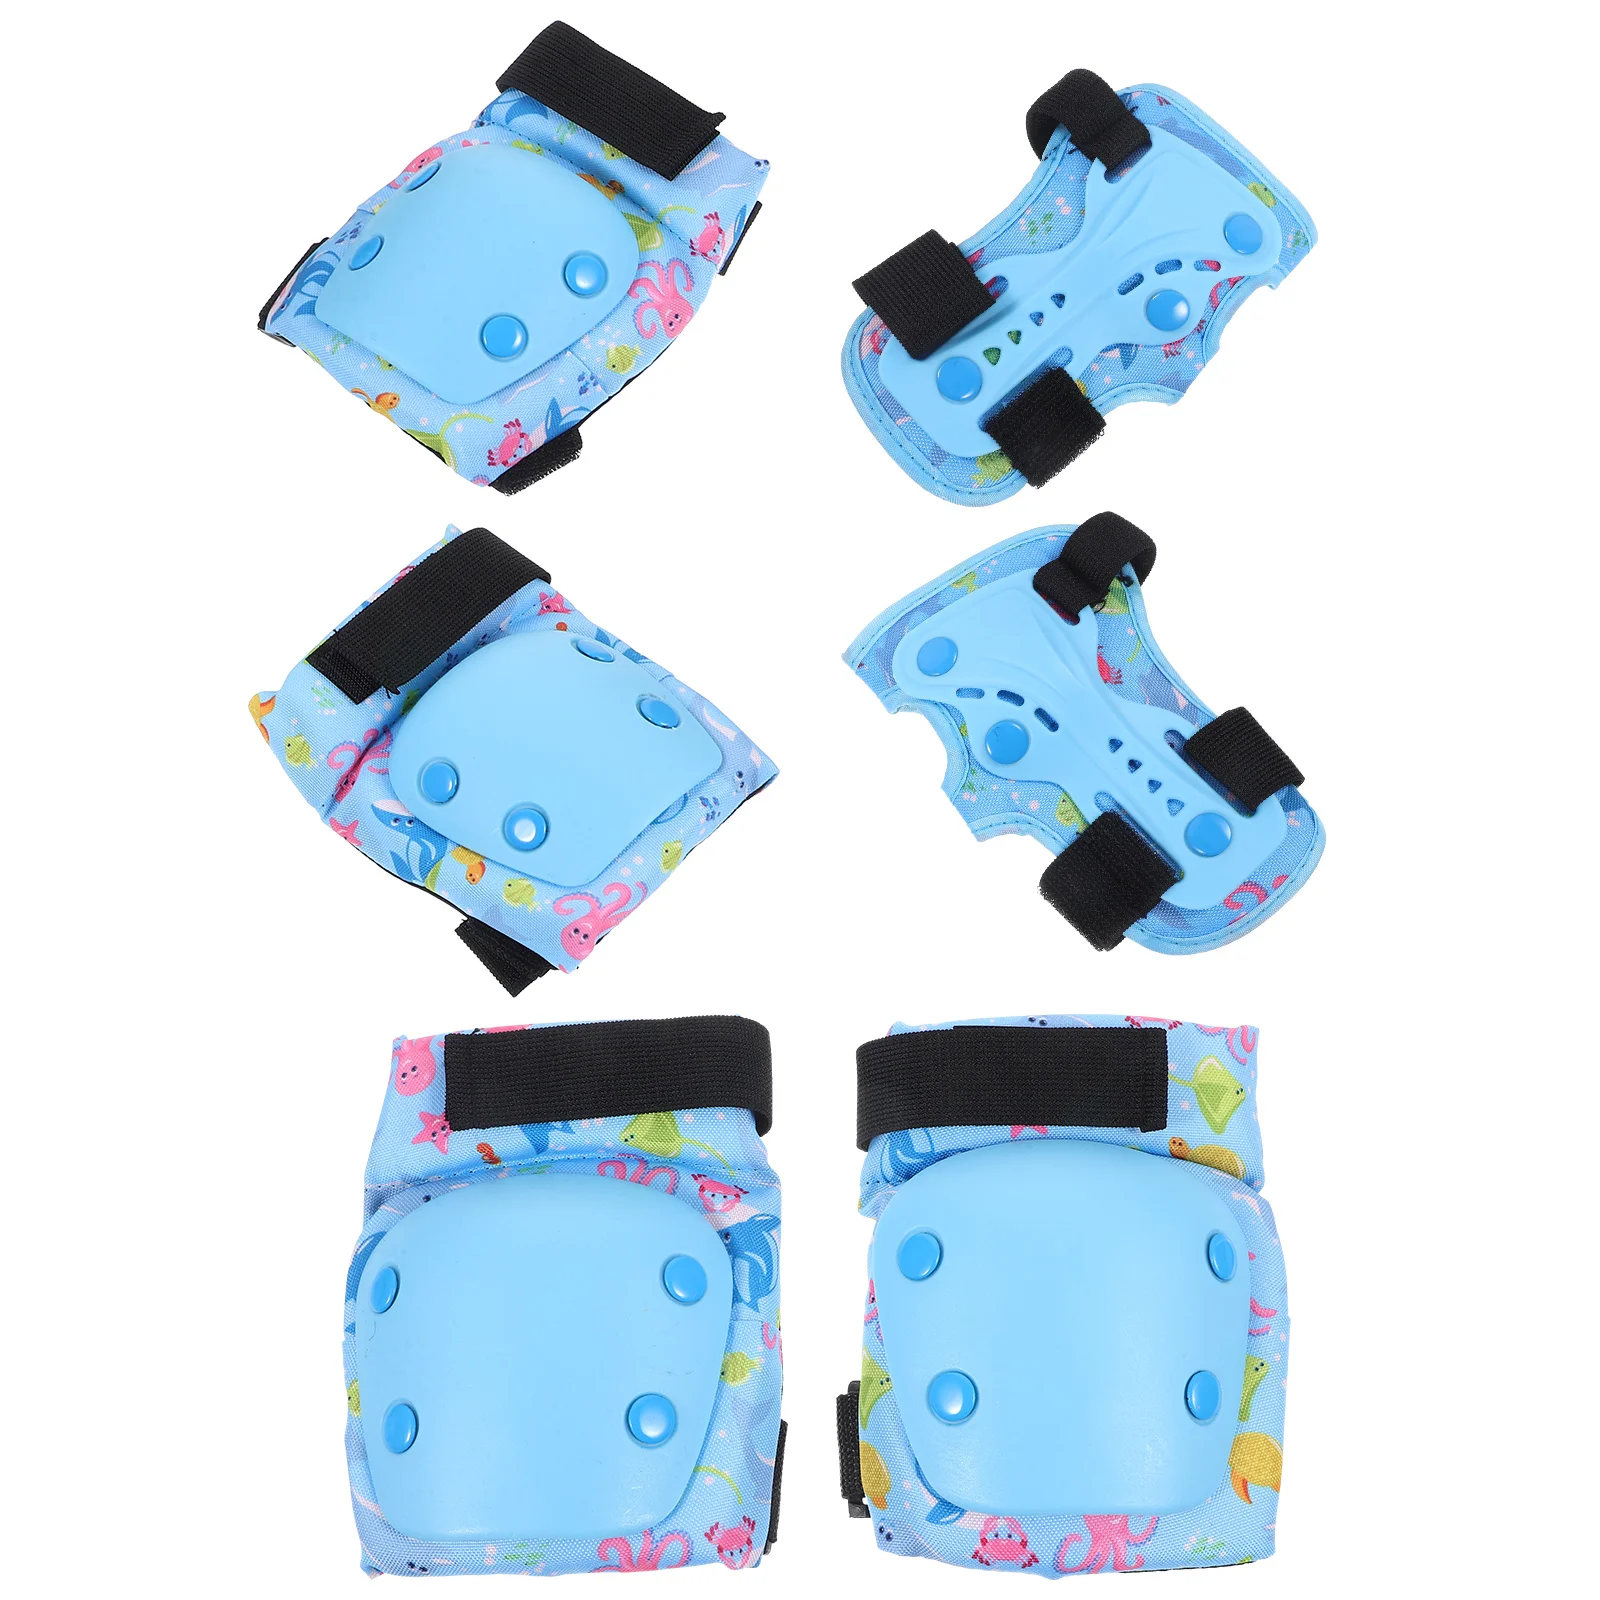 

Children's Protective Gear Set Roller Skating Supplies Scooter Bike Kids Knee Pads Outdoor Elbow Guards Brace Safety Sports for